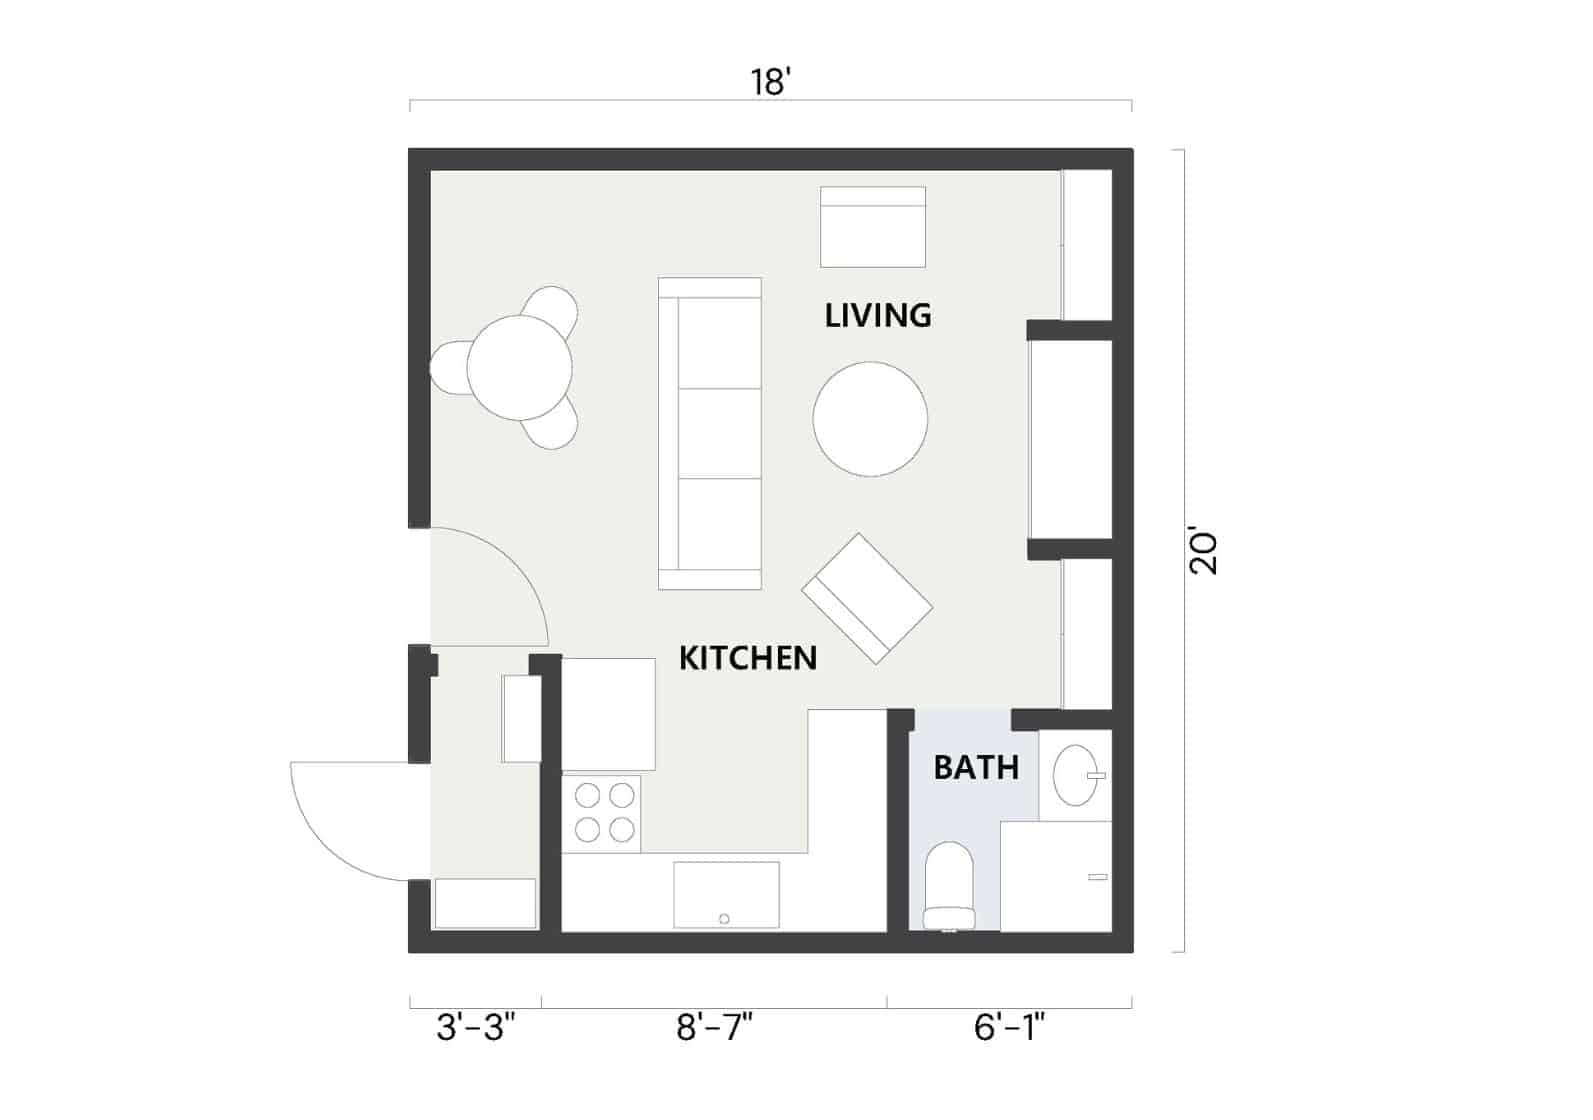 A simple floor plan of a small apartment